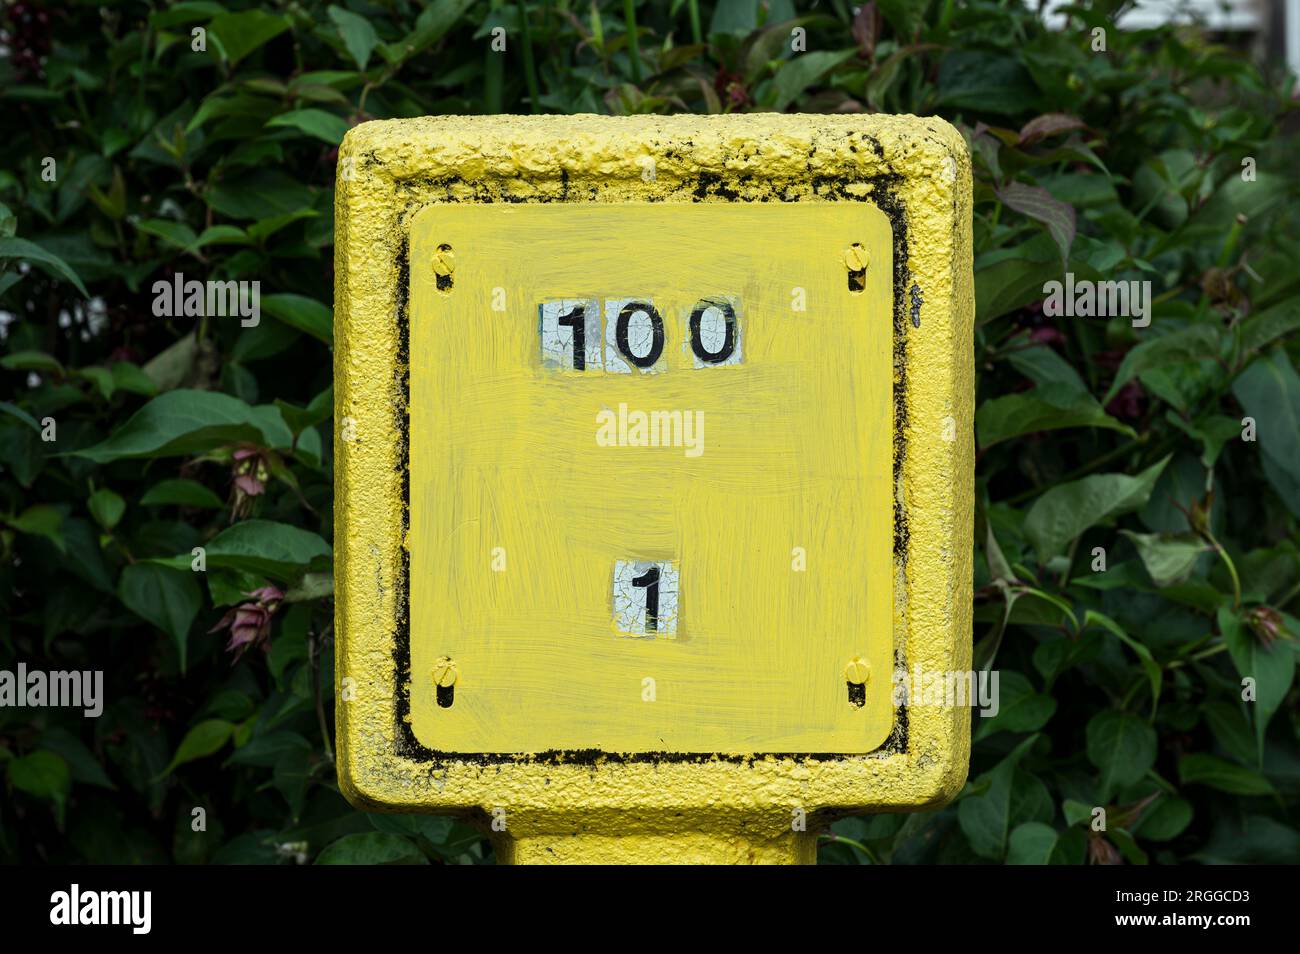 Numbers 1 to 100 on a yellow fire hydrant sign Stock Photo